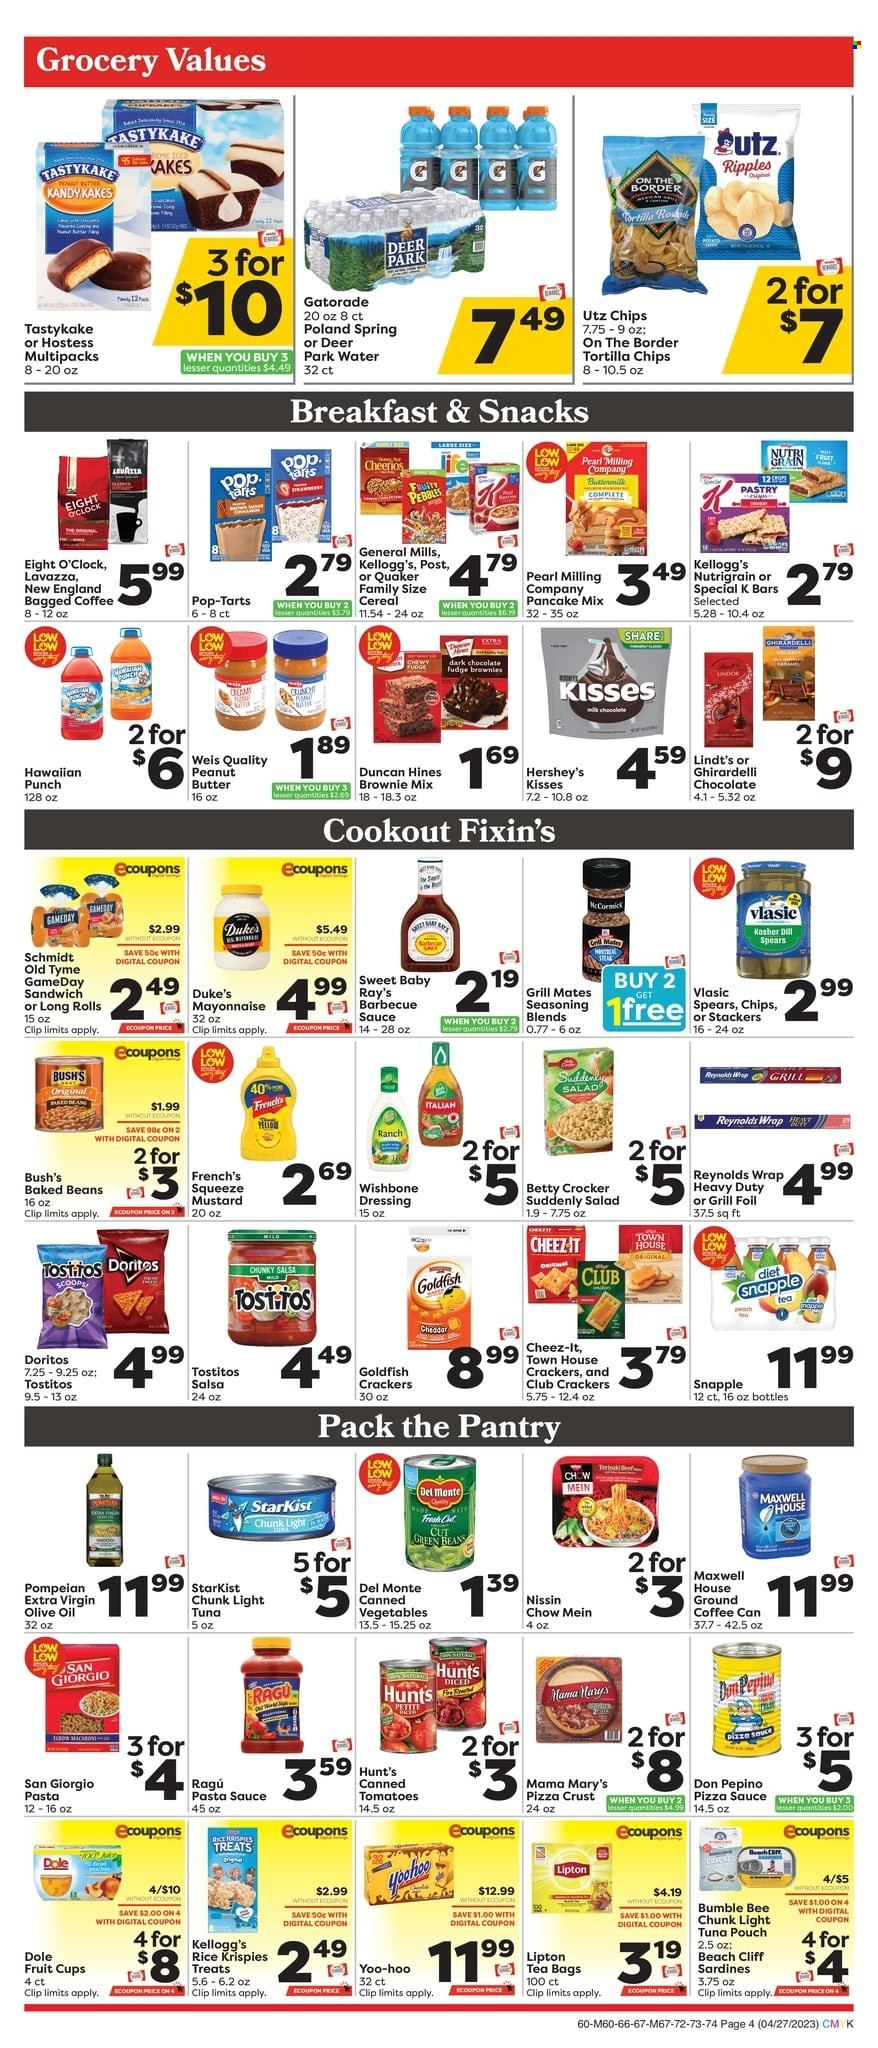 thumbnail - Weis Flyer - 04/27/2023 - 05/31/2023 - Sales products - brownie mix, pancake mix, Dole, fruit cup, steak, sardines, tuna, StarKist, pasta sauce, Bumble Bee, sauce, Quaker, Nissin, ragú pasta, cheese, mayonnaise, Hershey's, fudge, snack, crackers, Kellogg's, dark chocolate, Pop-Tarts, Ghirardelli, Doritos, tortilla chips, chips, Goldfish, Cheez-It, Tostitos, light tuna, baked beans, Del Monte, cereals, Cheerios, Rice Krispies, dill, spice, BBQ sauce, mustard, dressing, salsa, ragu, extra virgin olive oil, olive oil, oil, peanut butter, Lipton, Snapple, Gatorade, water, Maxwell House, tea bags, coffee, bagged coffee, Lavazza, Eight O'Clock. Page 4.